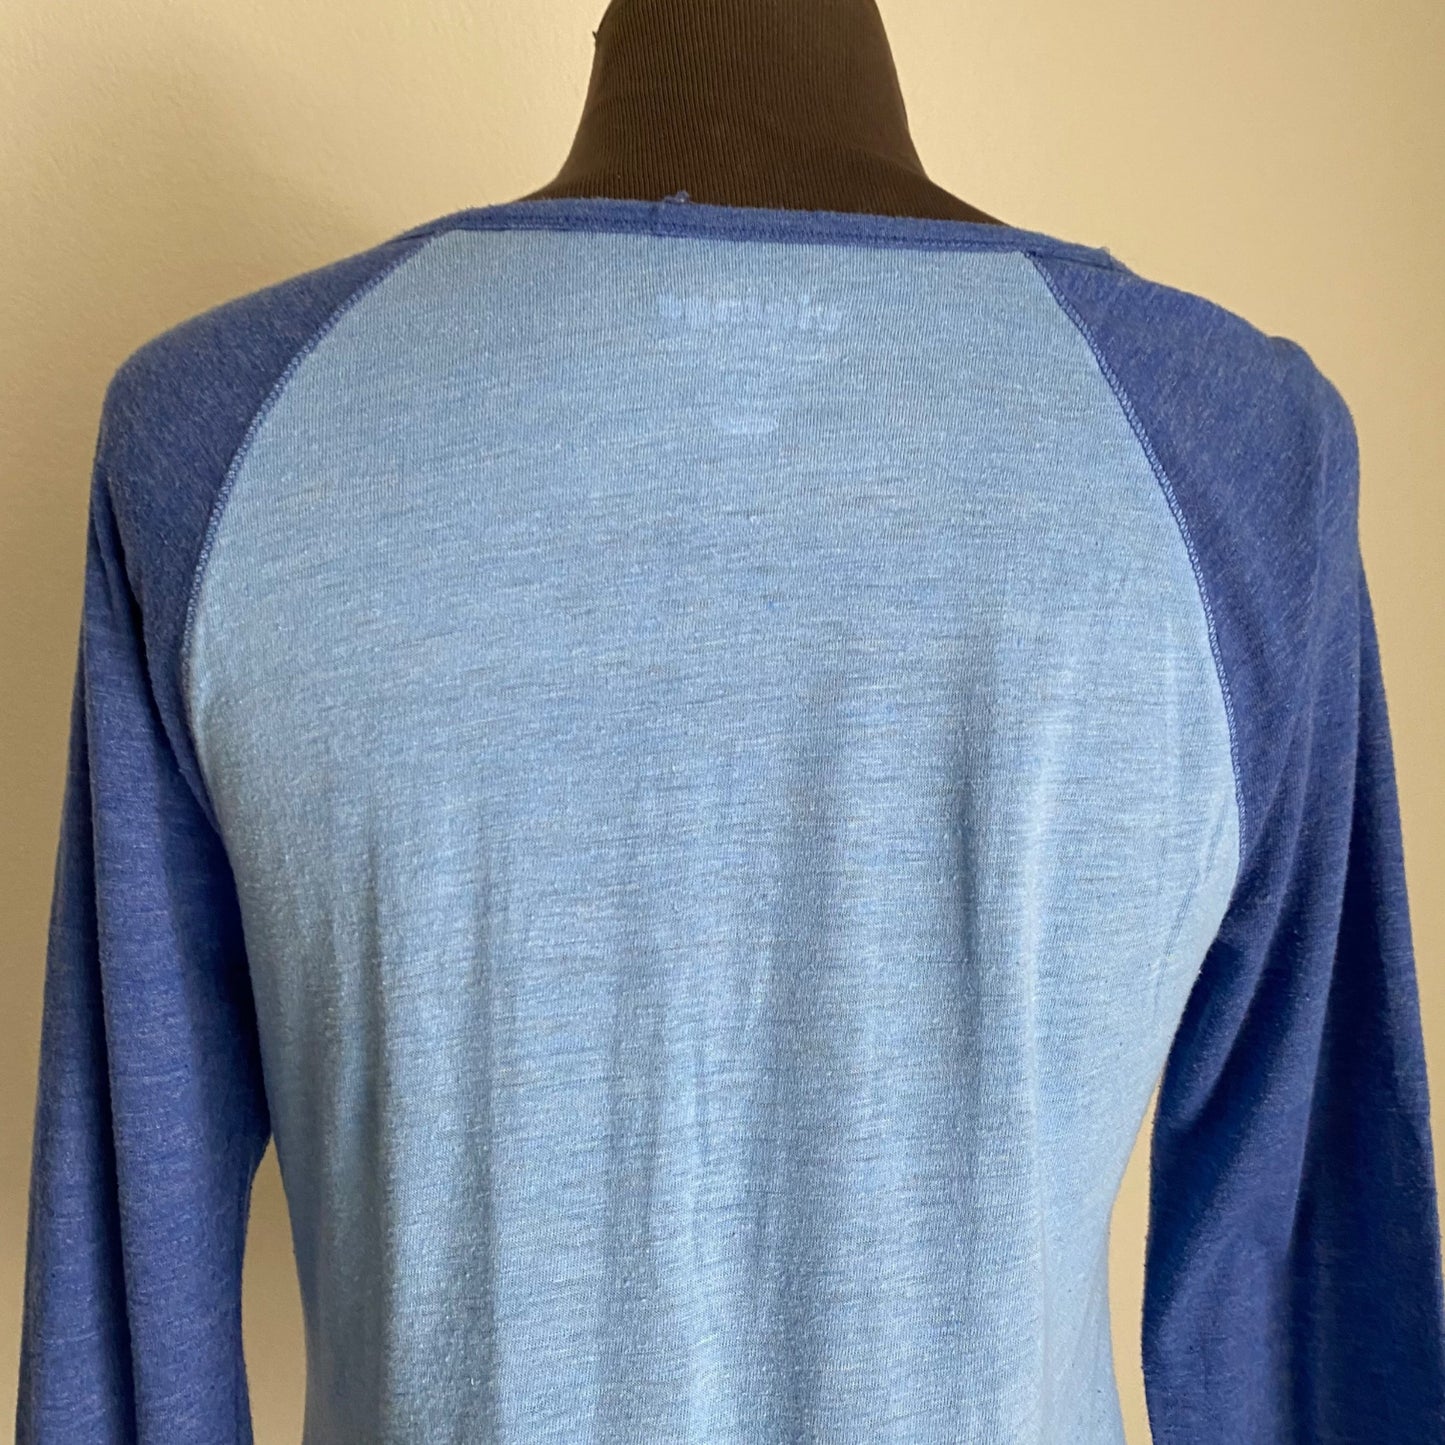 Old Navy sz S Vintage inspired long sleeve scoop neck shirt